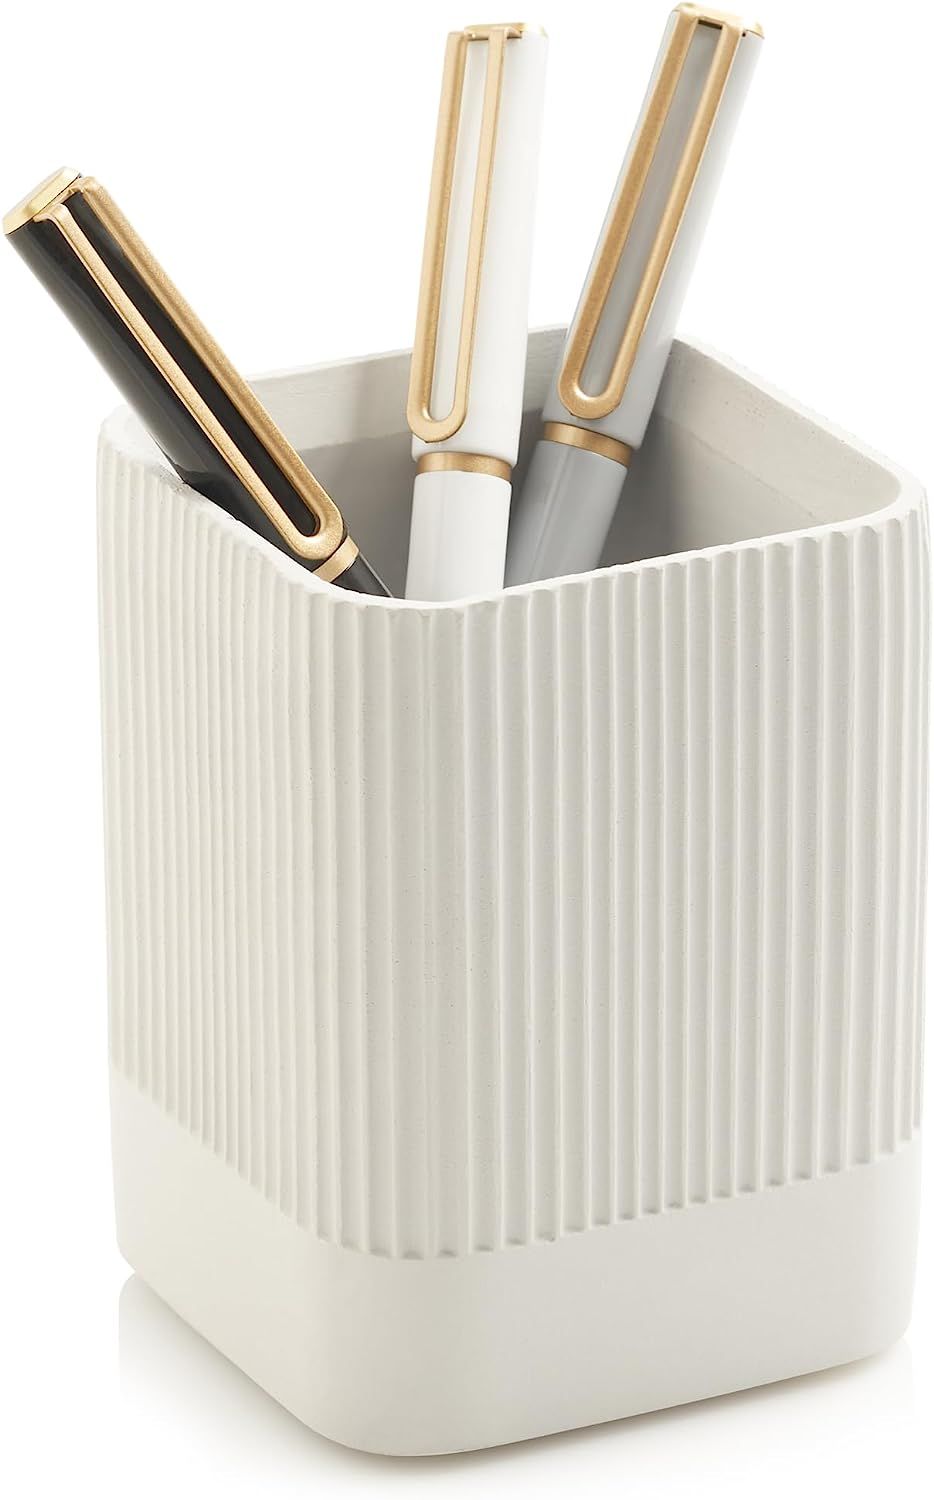 Aesthetic Pen Holder For Your Desk - The Perfect Modern Concrete Pencil Holder Easily Organizes A... | Amazon (US)